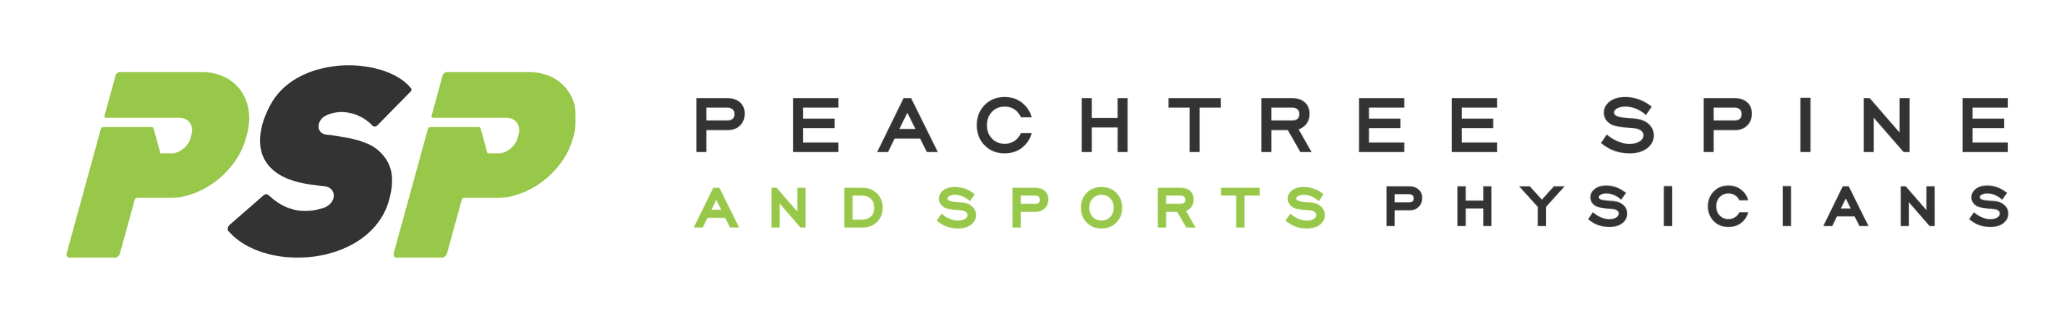 Peachtree Spine & Sports Physicians